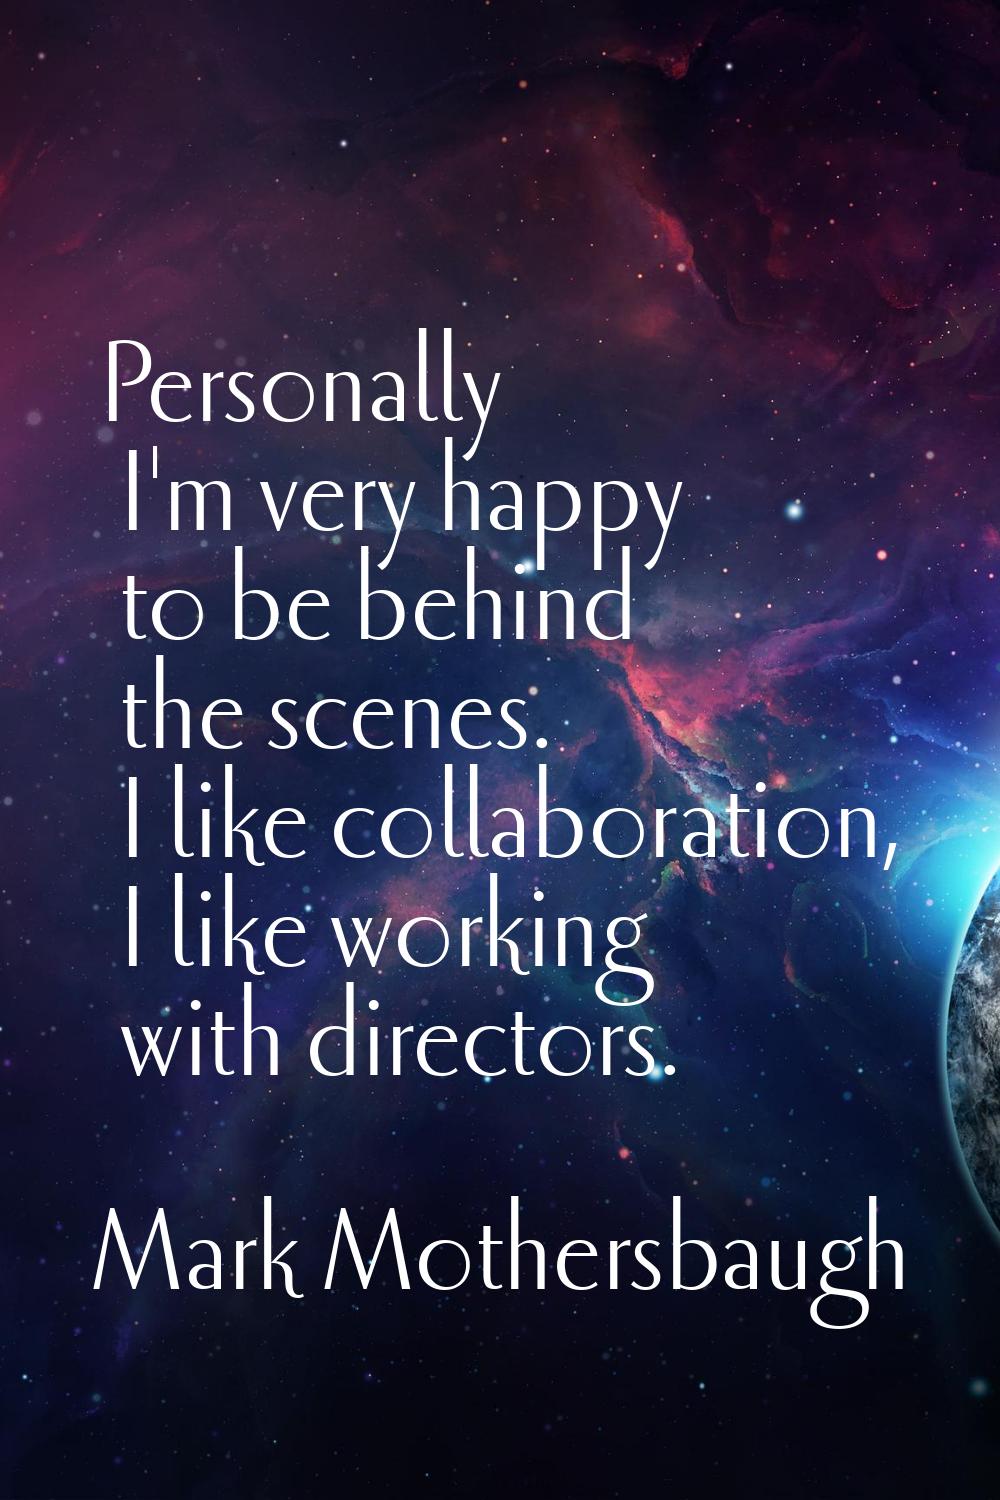 Personally I'm very happy to be behind the scenes. I like collaboration, I like working with direct